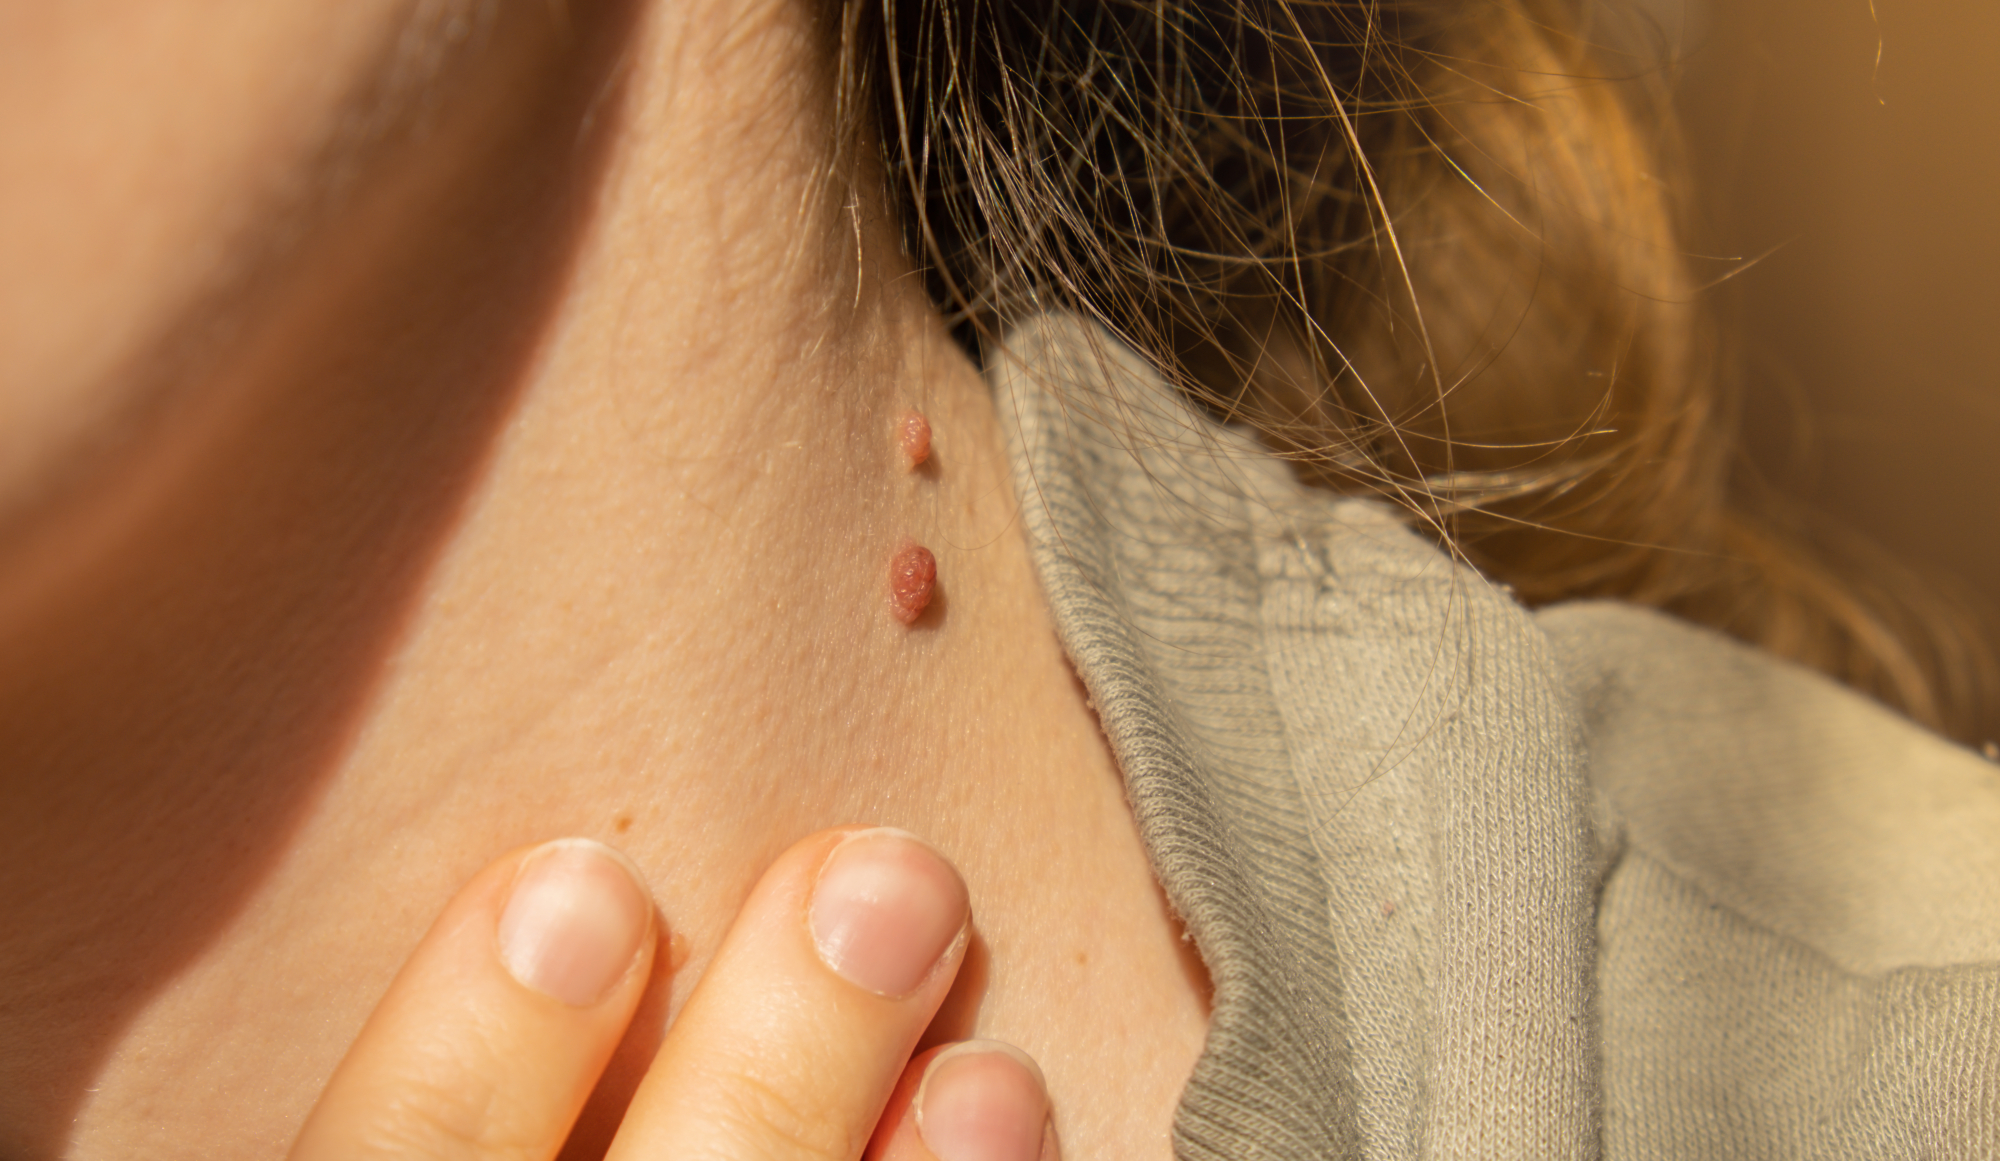 Skin Tags During Pregnancy: Should You Be Concerned?